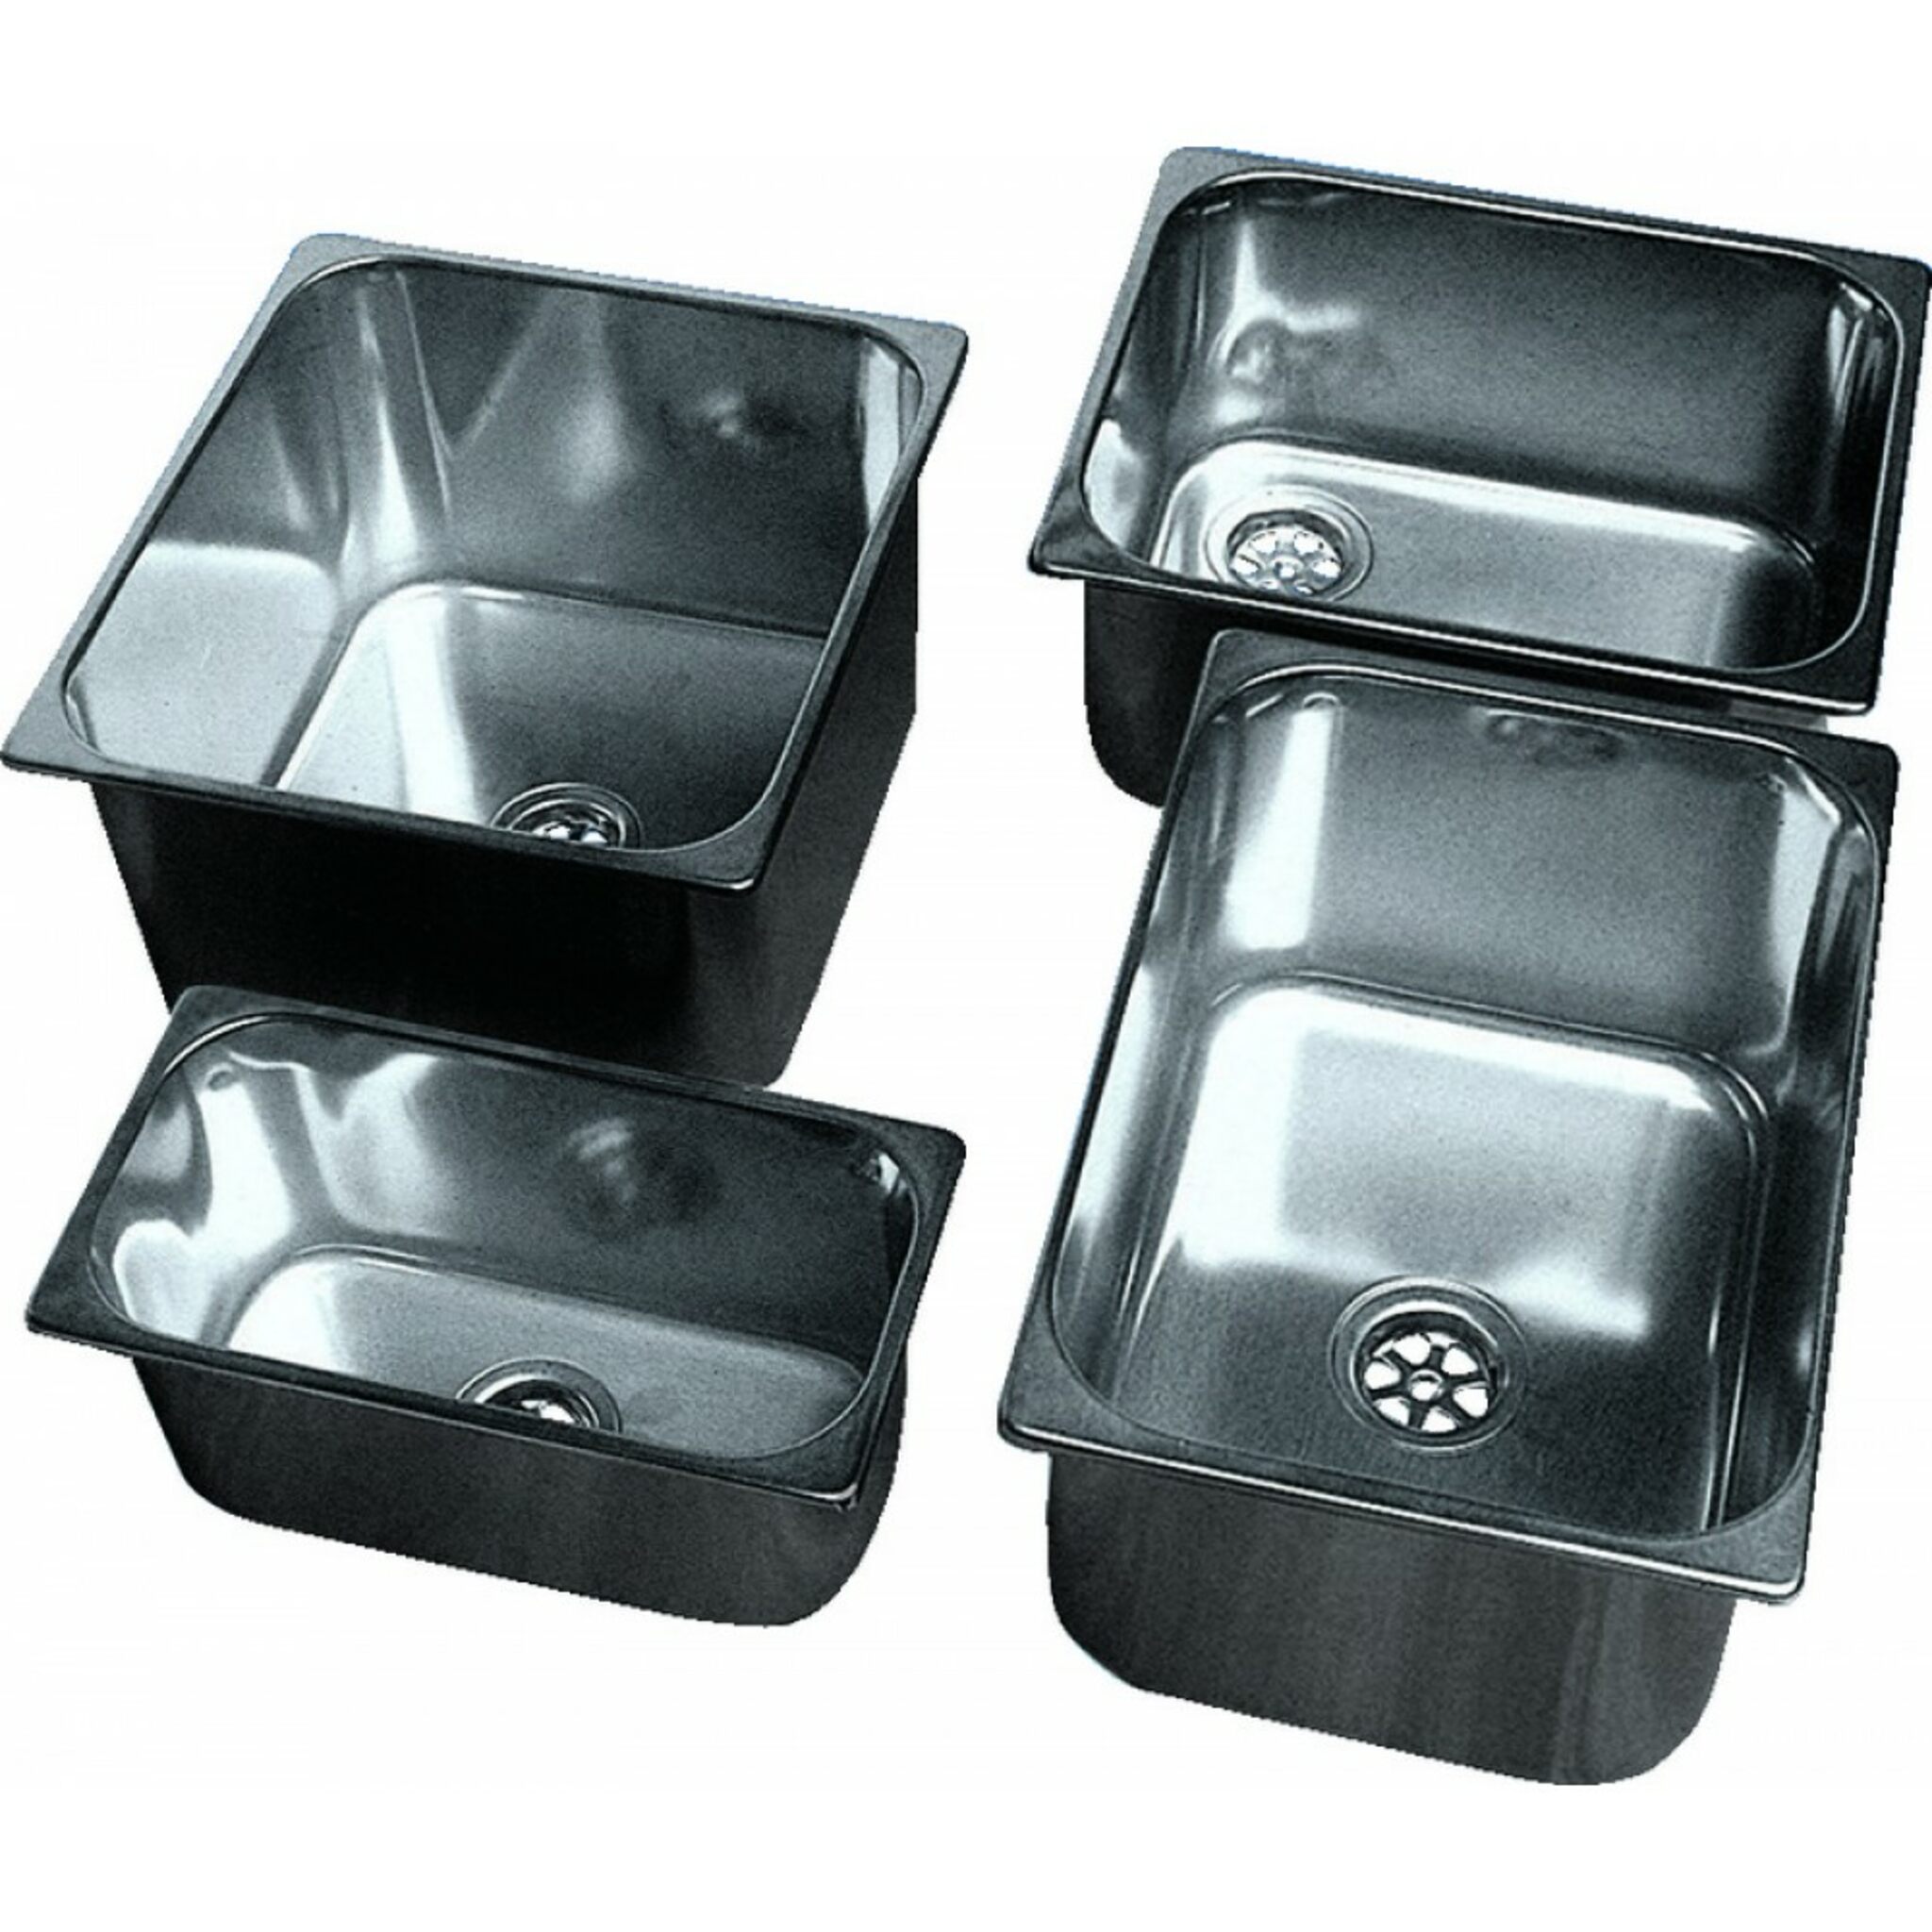 Plastimo fitted sink